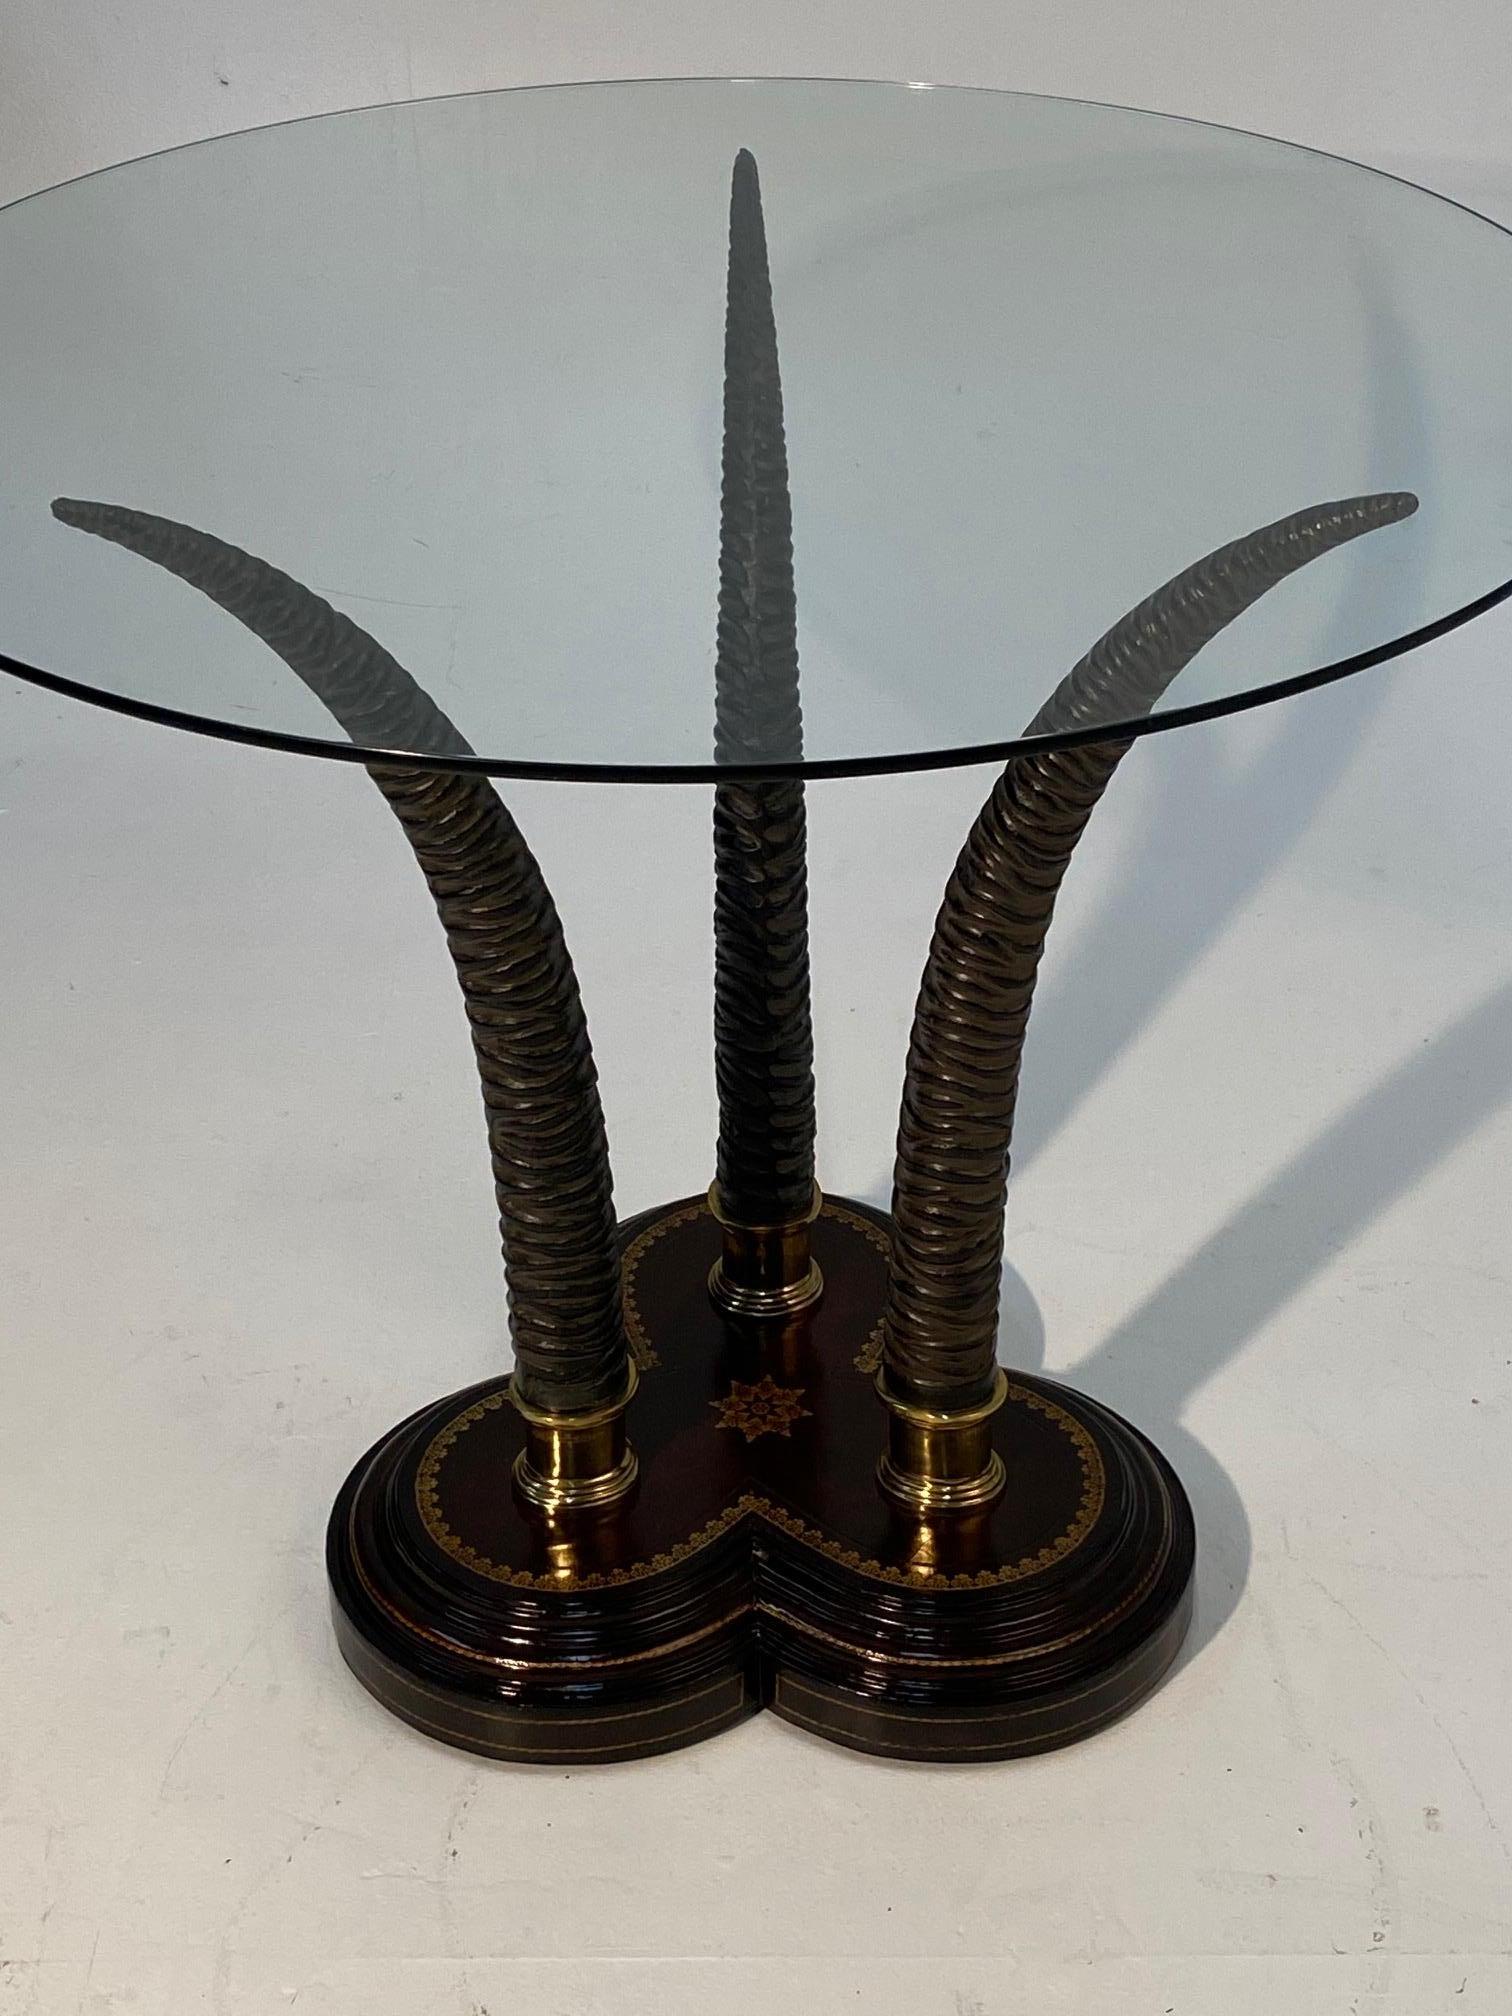 Striking center table having a fabulous tripod faux antler base with shamrock shaped tooled leather stand and round glass top.
Scalloped base is 18 x 18
23 diameter horn base
Glass is 3/8 thick.